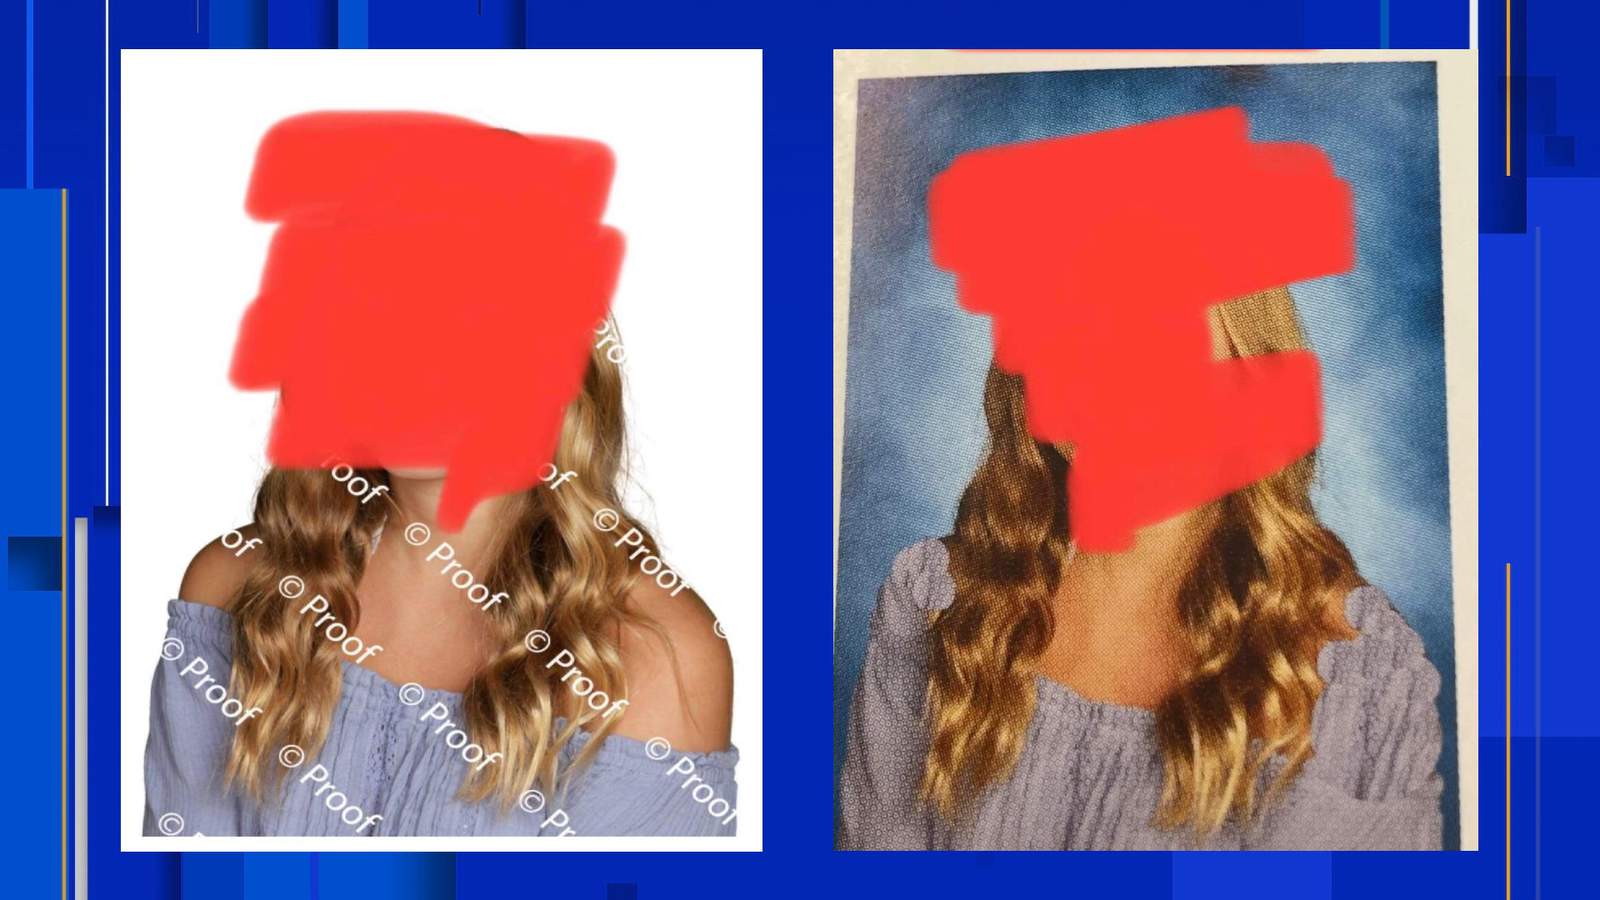 St Johns School District Offers Refunds After Female Student Photos Edited In Yearbook For Dress Code Violations